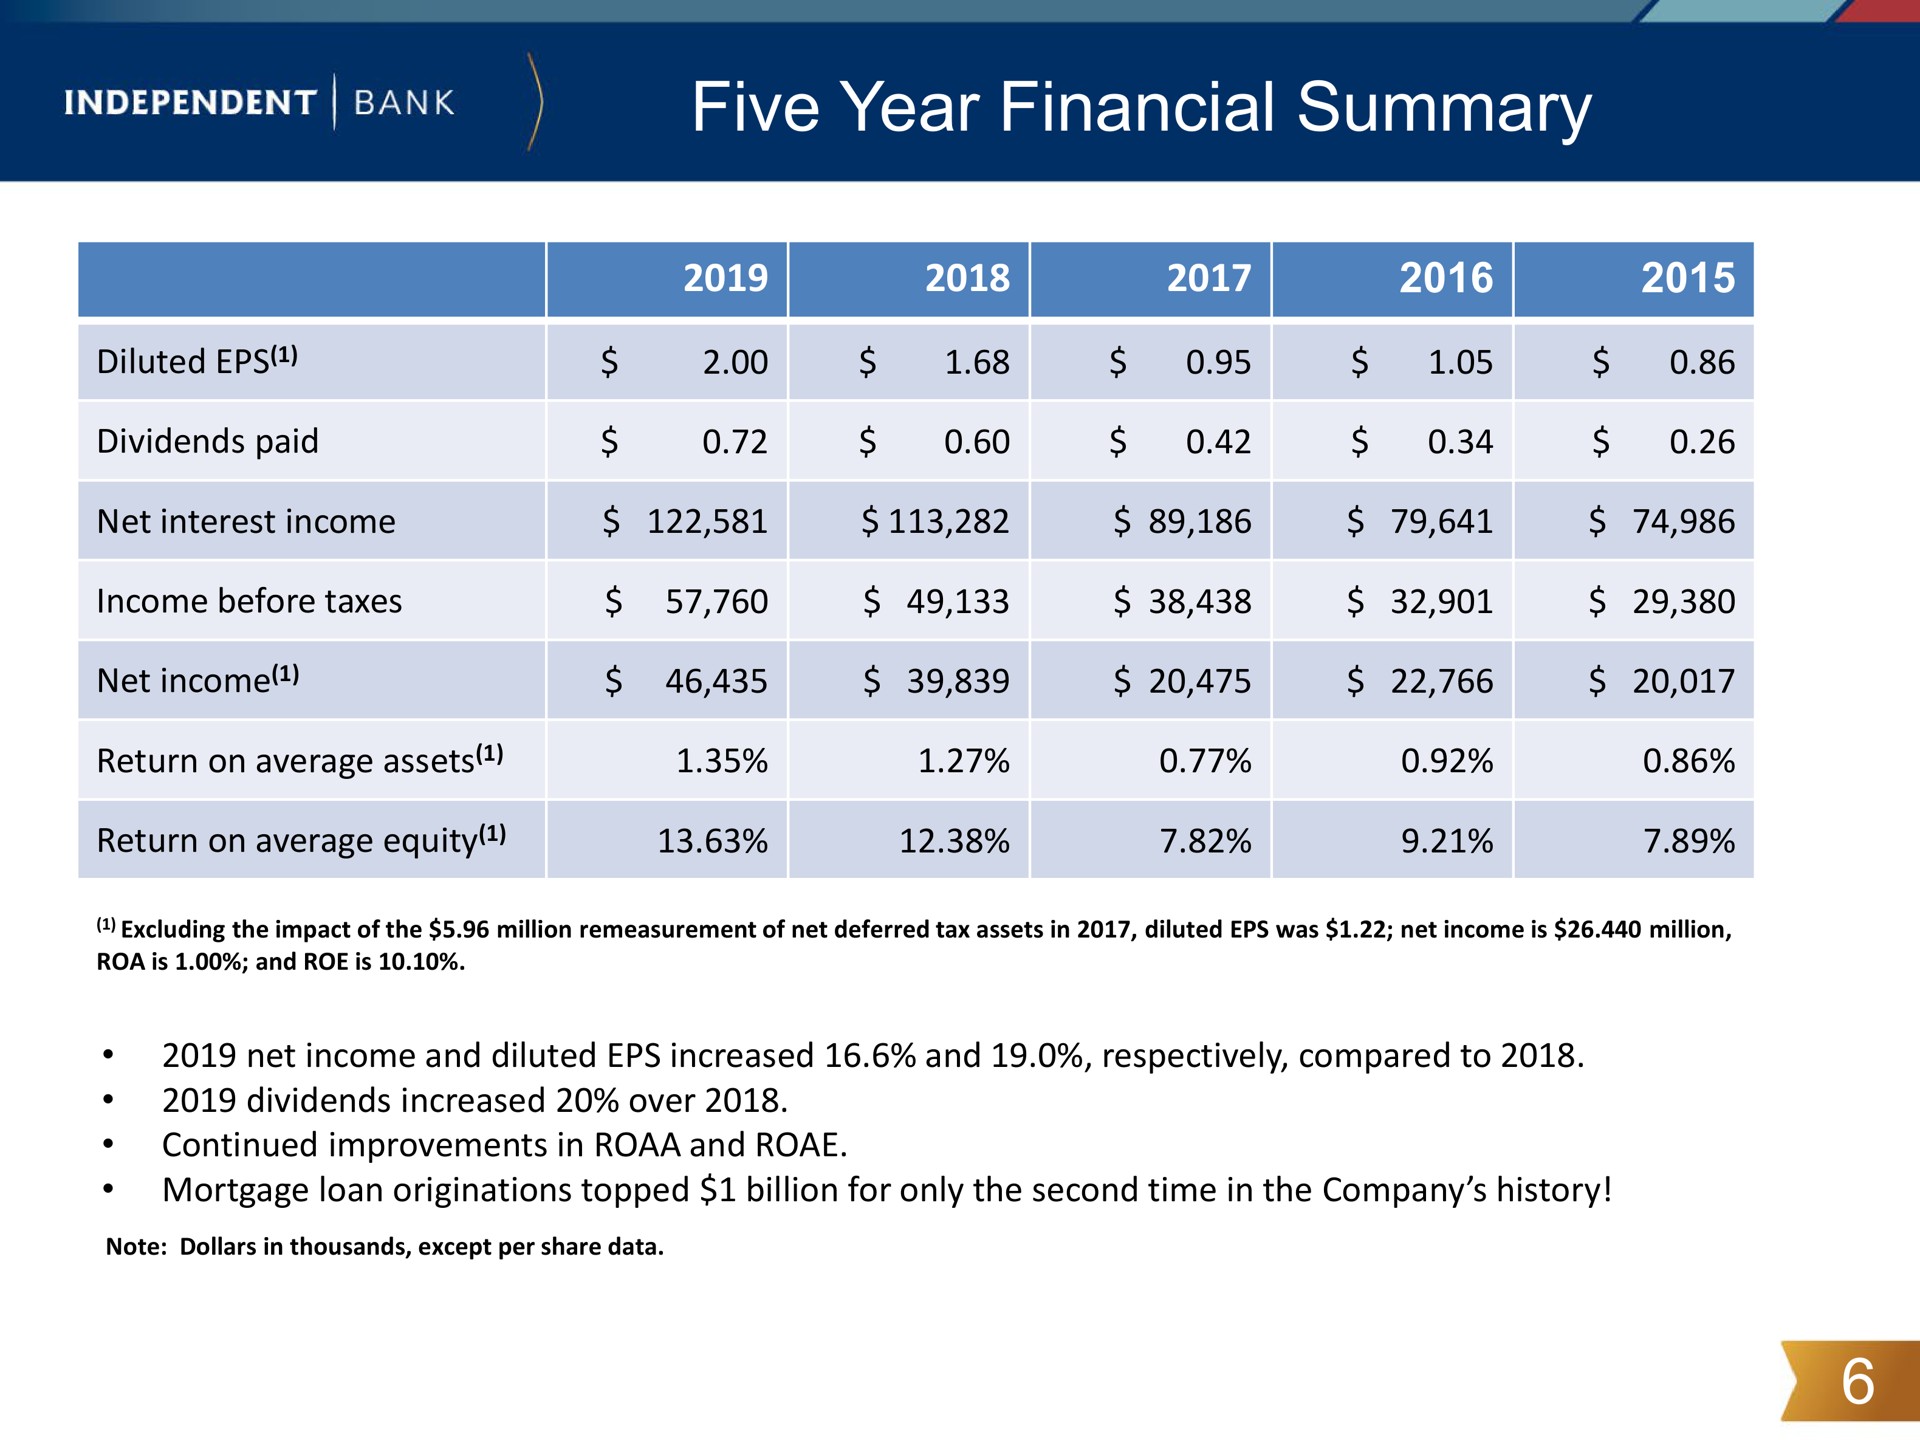 five year financial summary | Independent Bank Corp